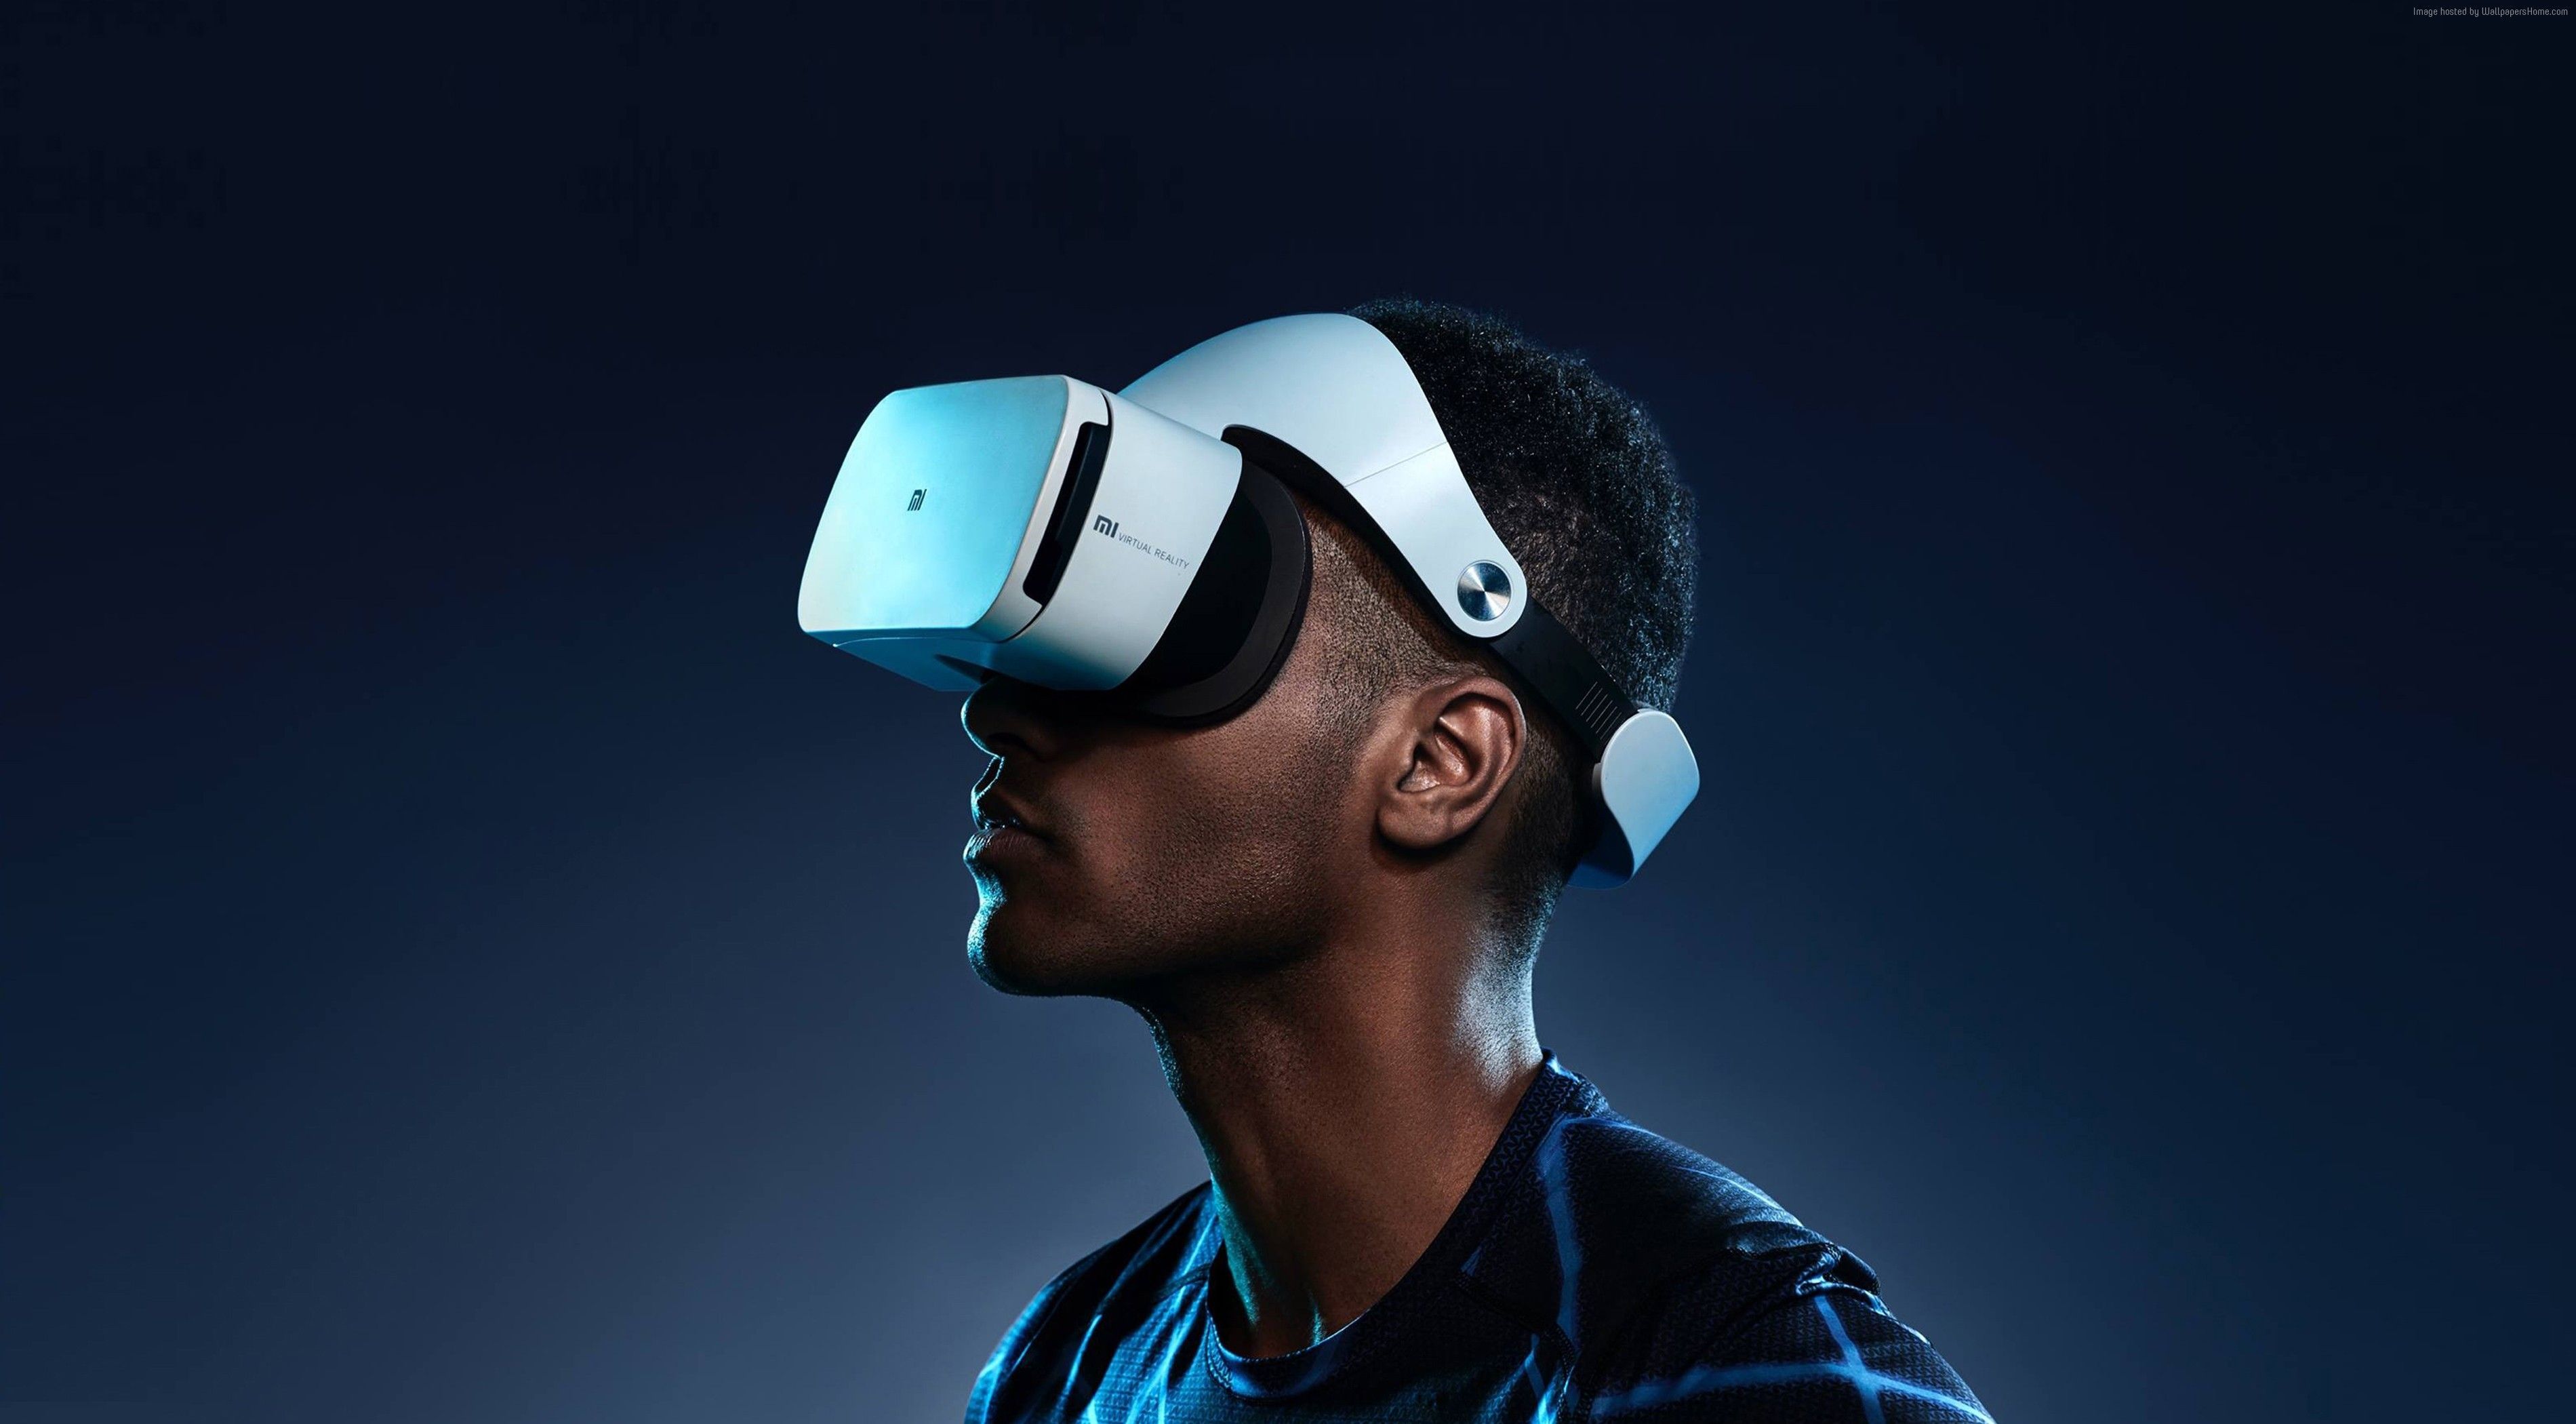 a picture of a man wearing a Sony VR Headset, implying incoming web3 developments.